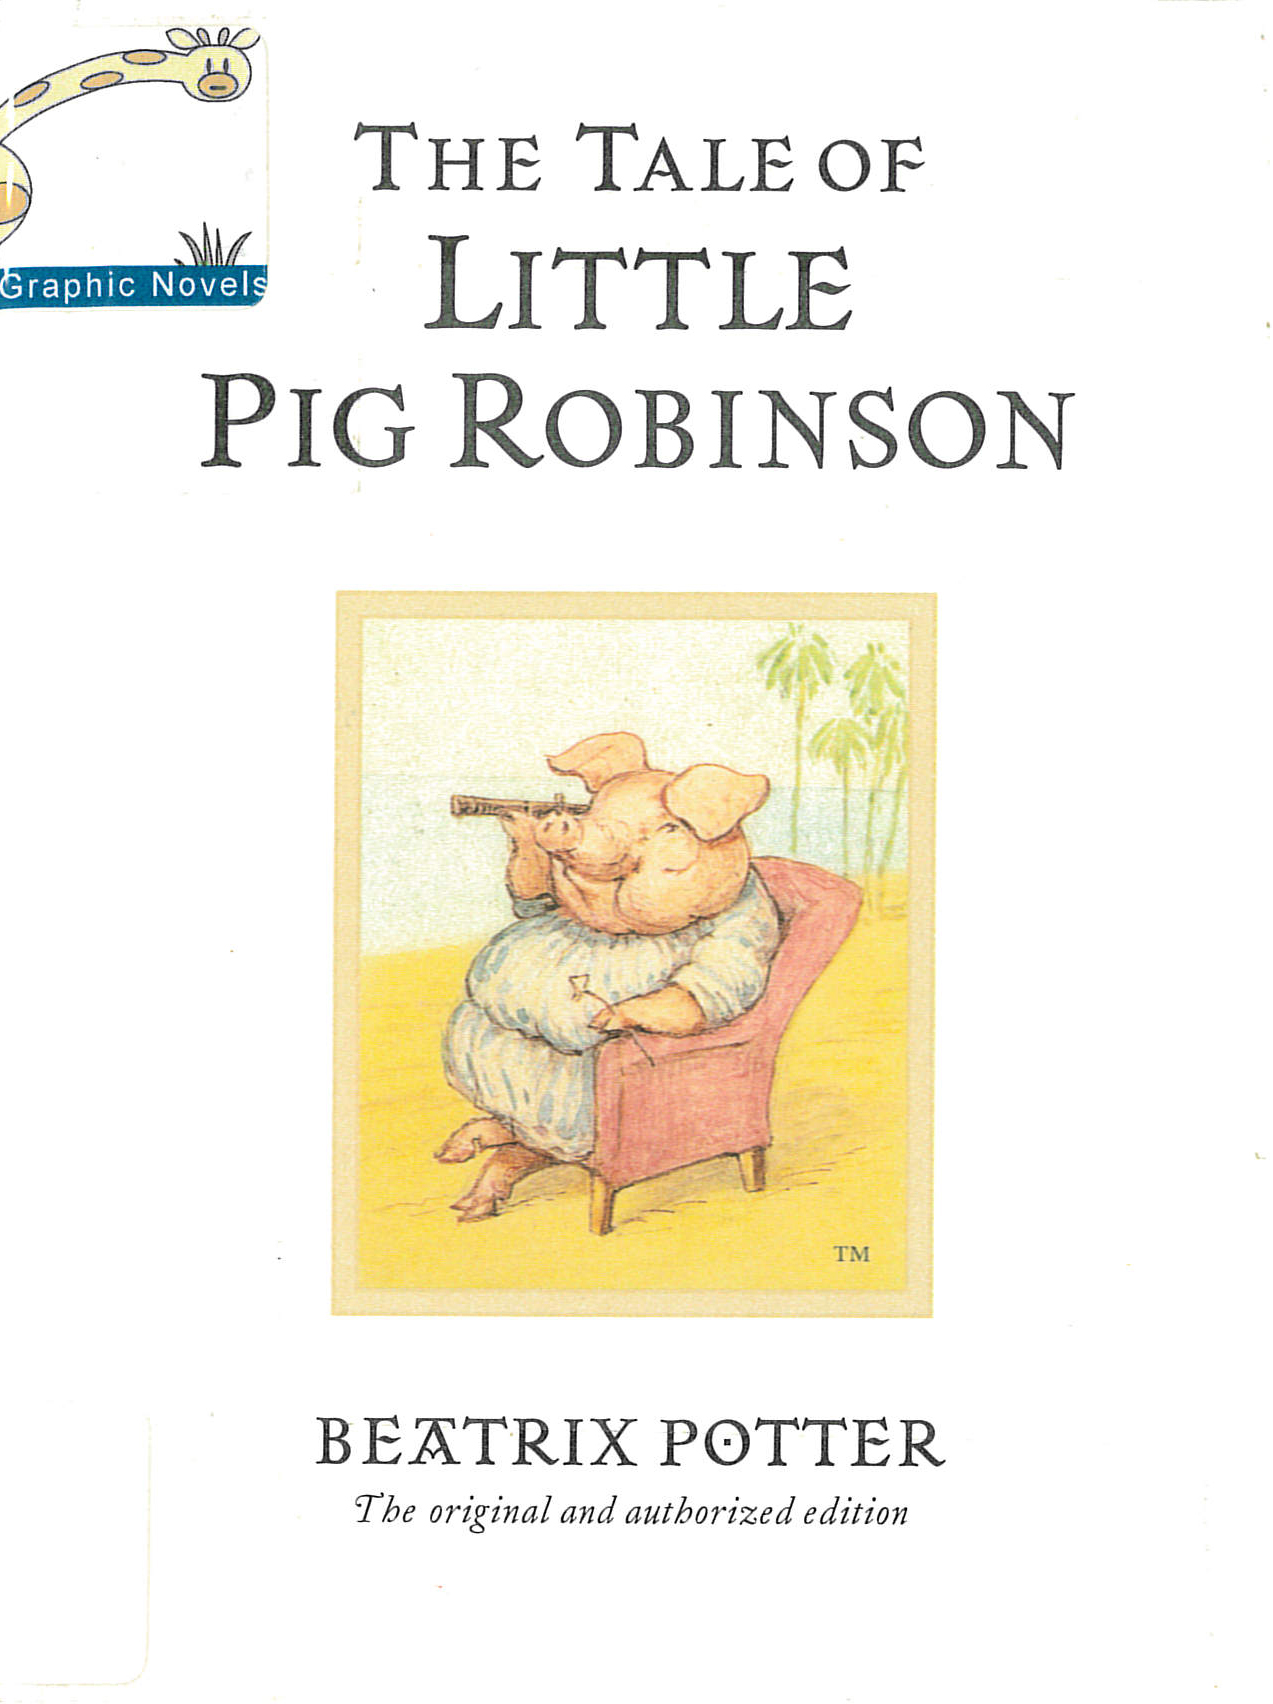 The tale of Little Pig Robinson